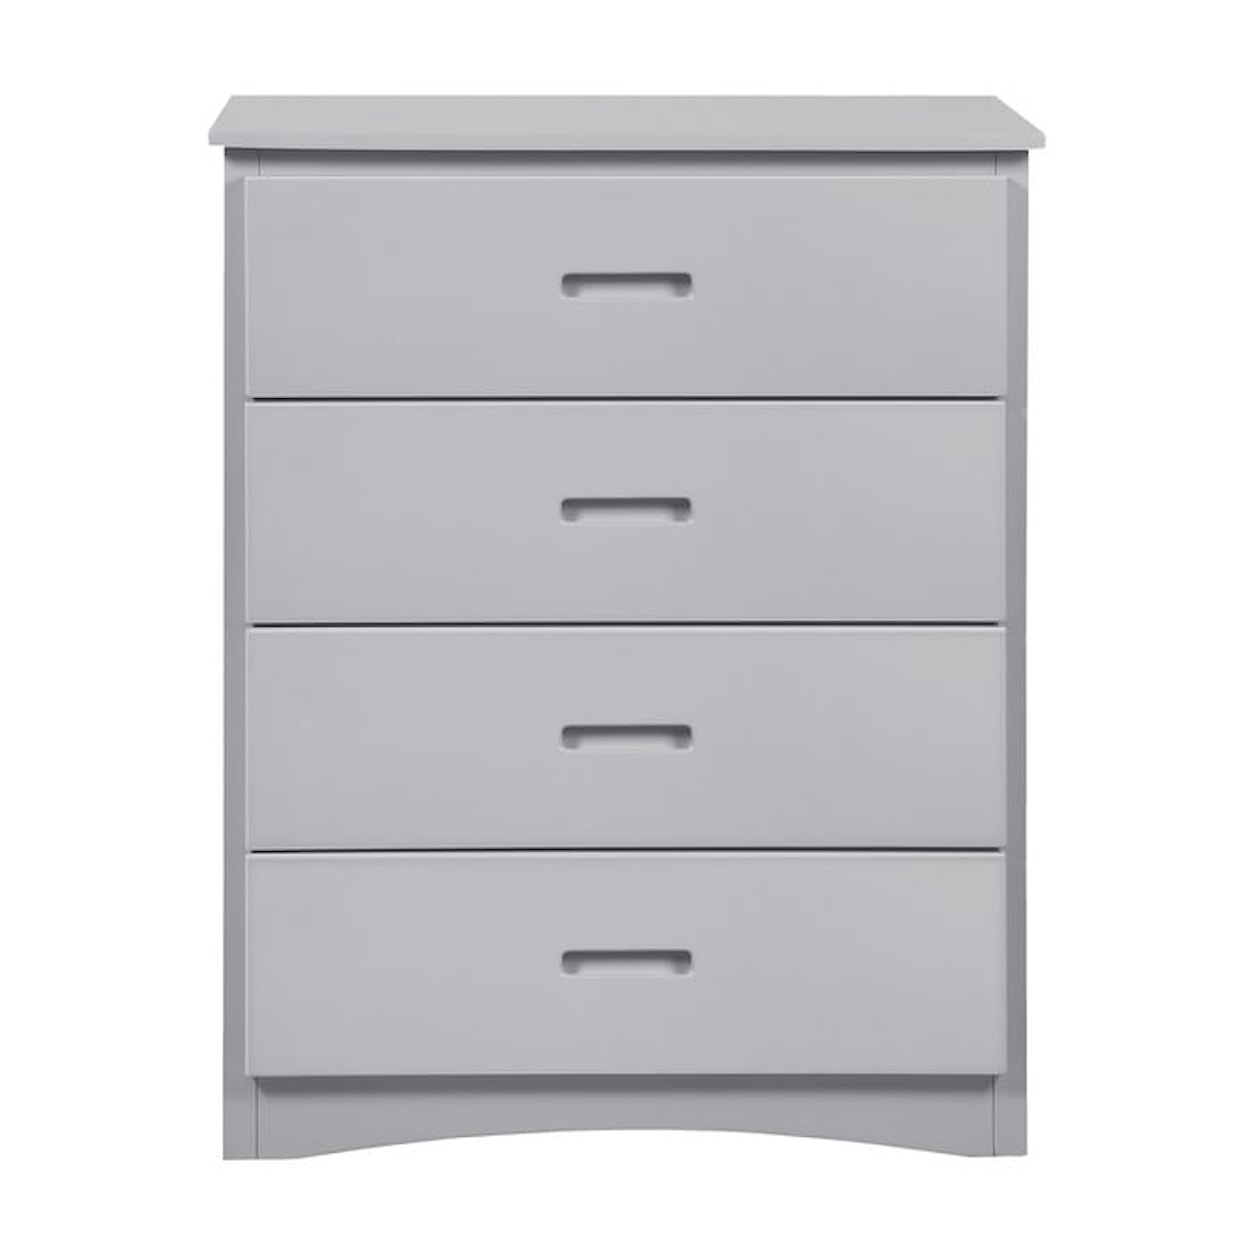 Homelegance Rowe Chest of Drawers